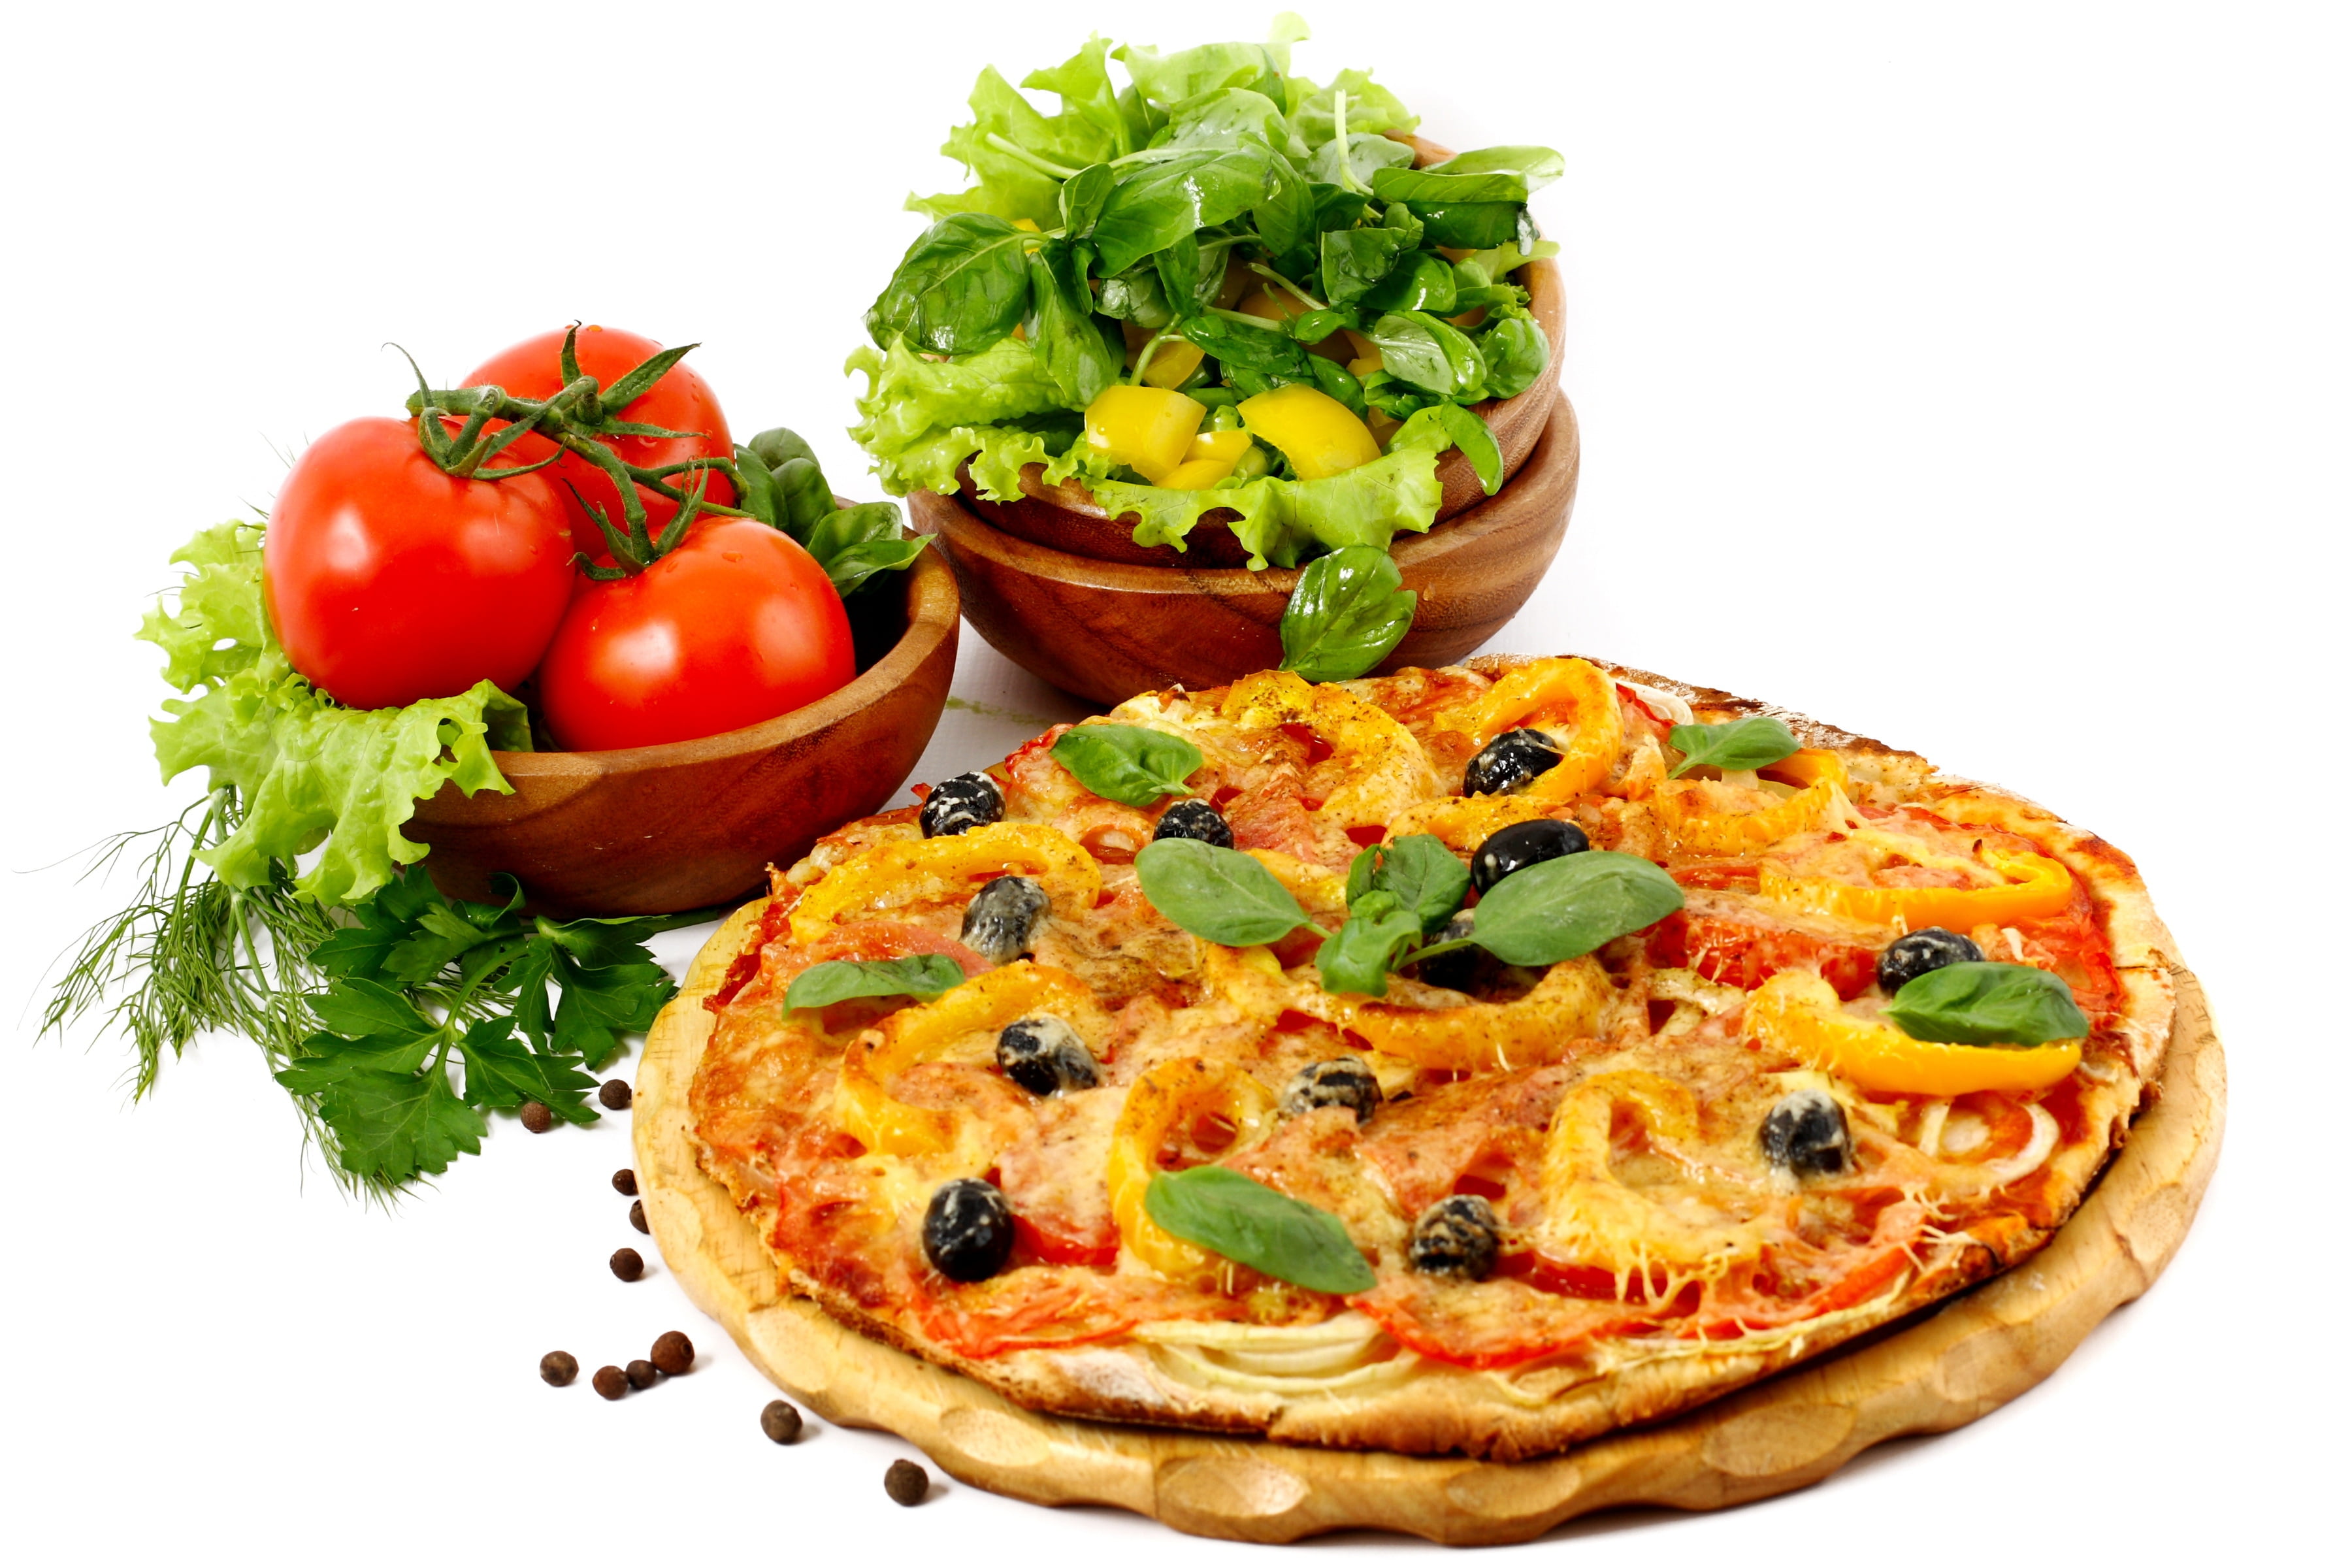 pizza dish, vegetables, cakes, pastries, cheese, tomato, food